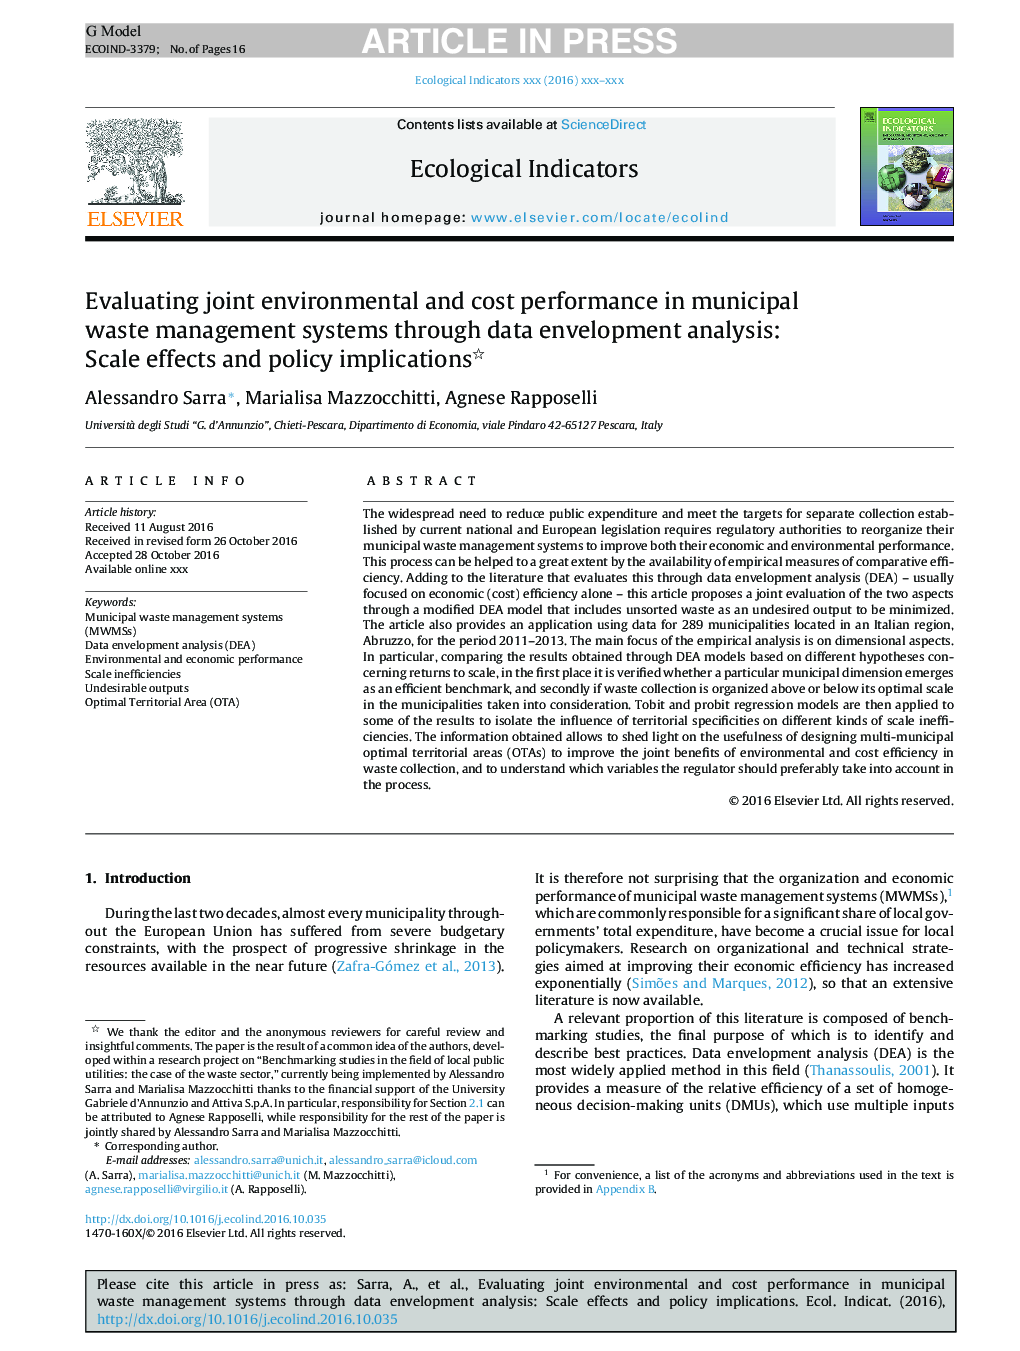 Evaluating joint environmental and cost performance in municipal waste management systems through data envelopment analysis: Scale effects and policy implications